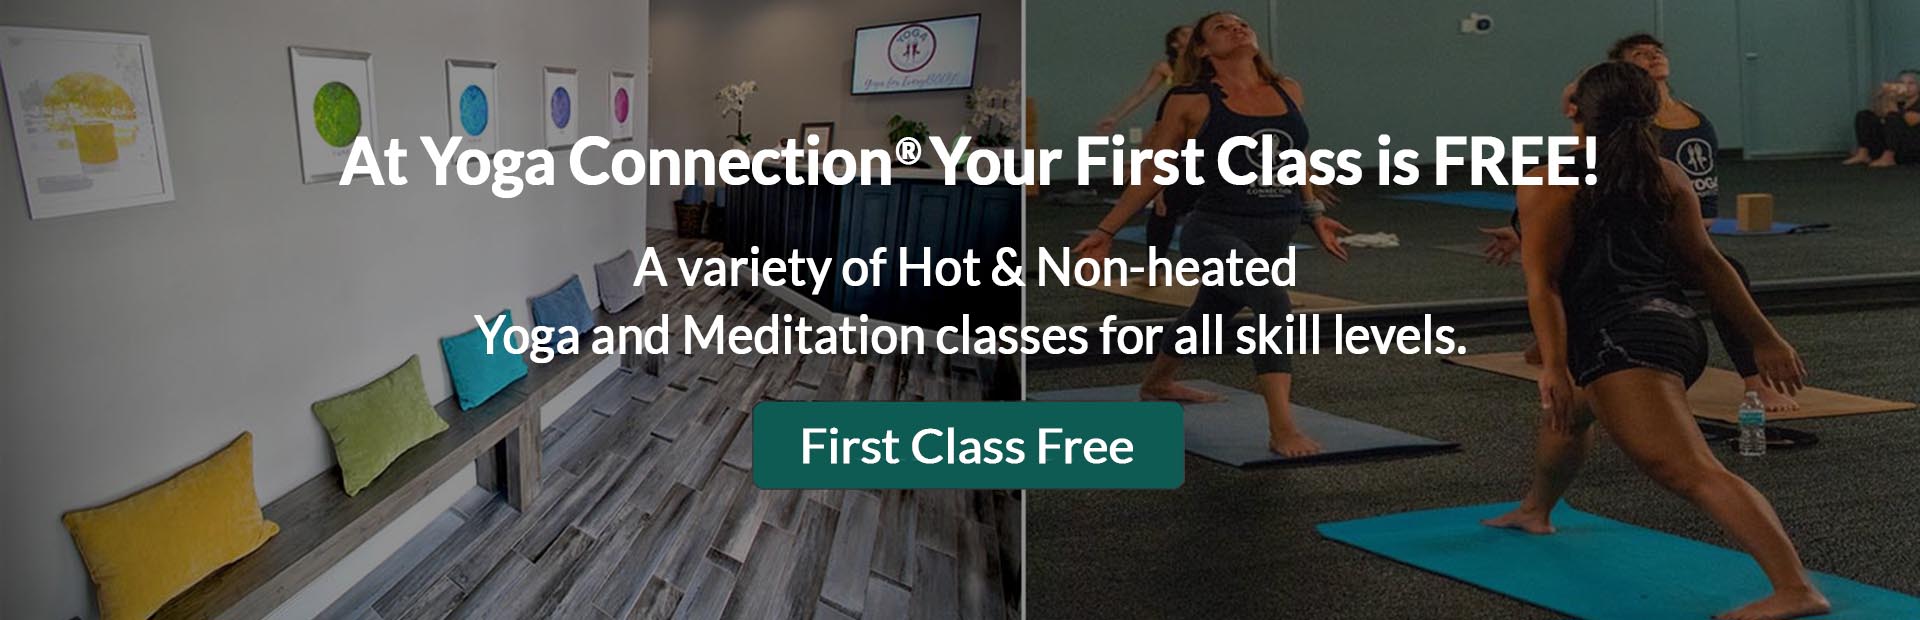 first class free at the yoga connection